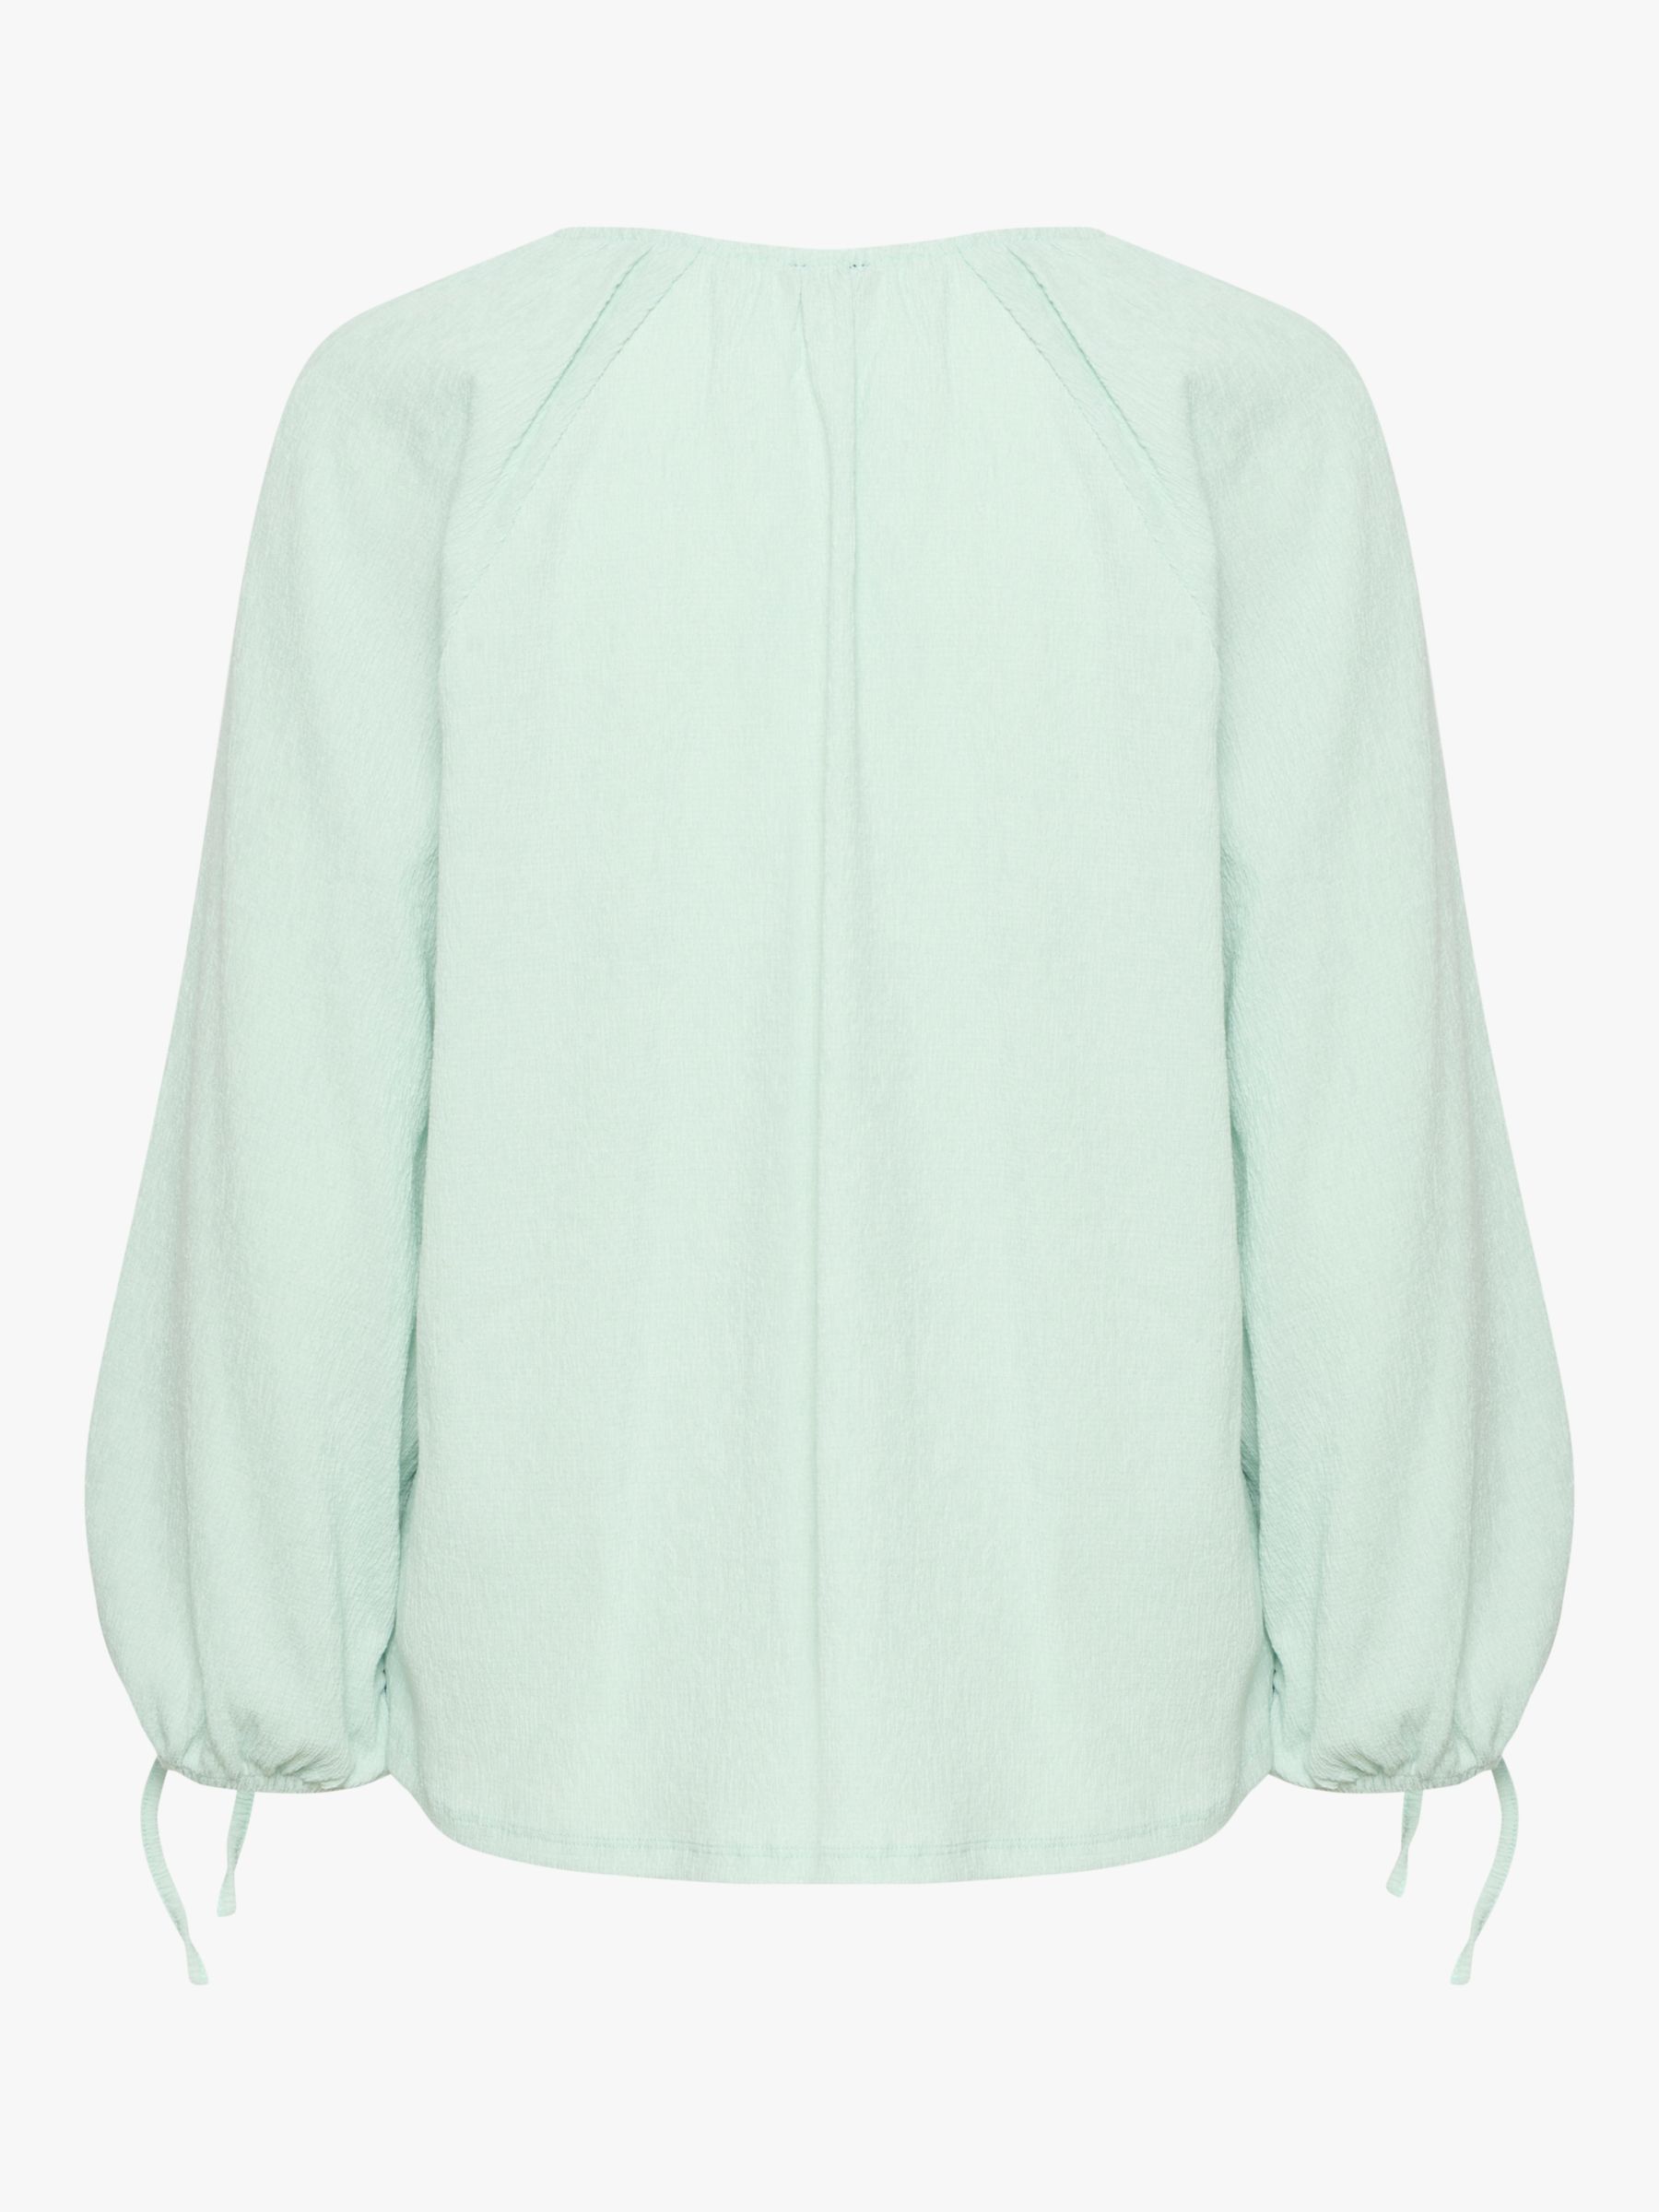 Soaked In Luxury Catharina Drawstring Trim Blouse, Surf Spray, XS